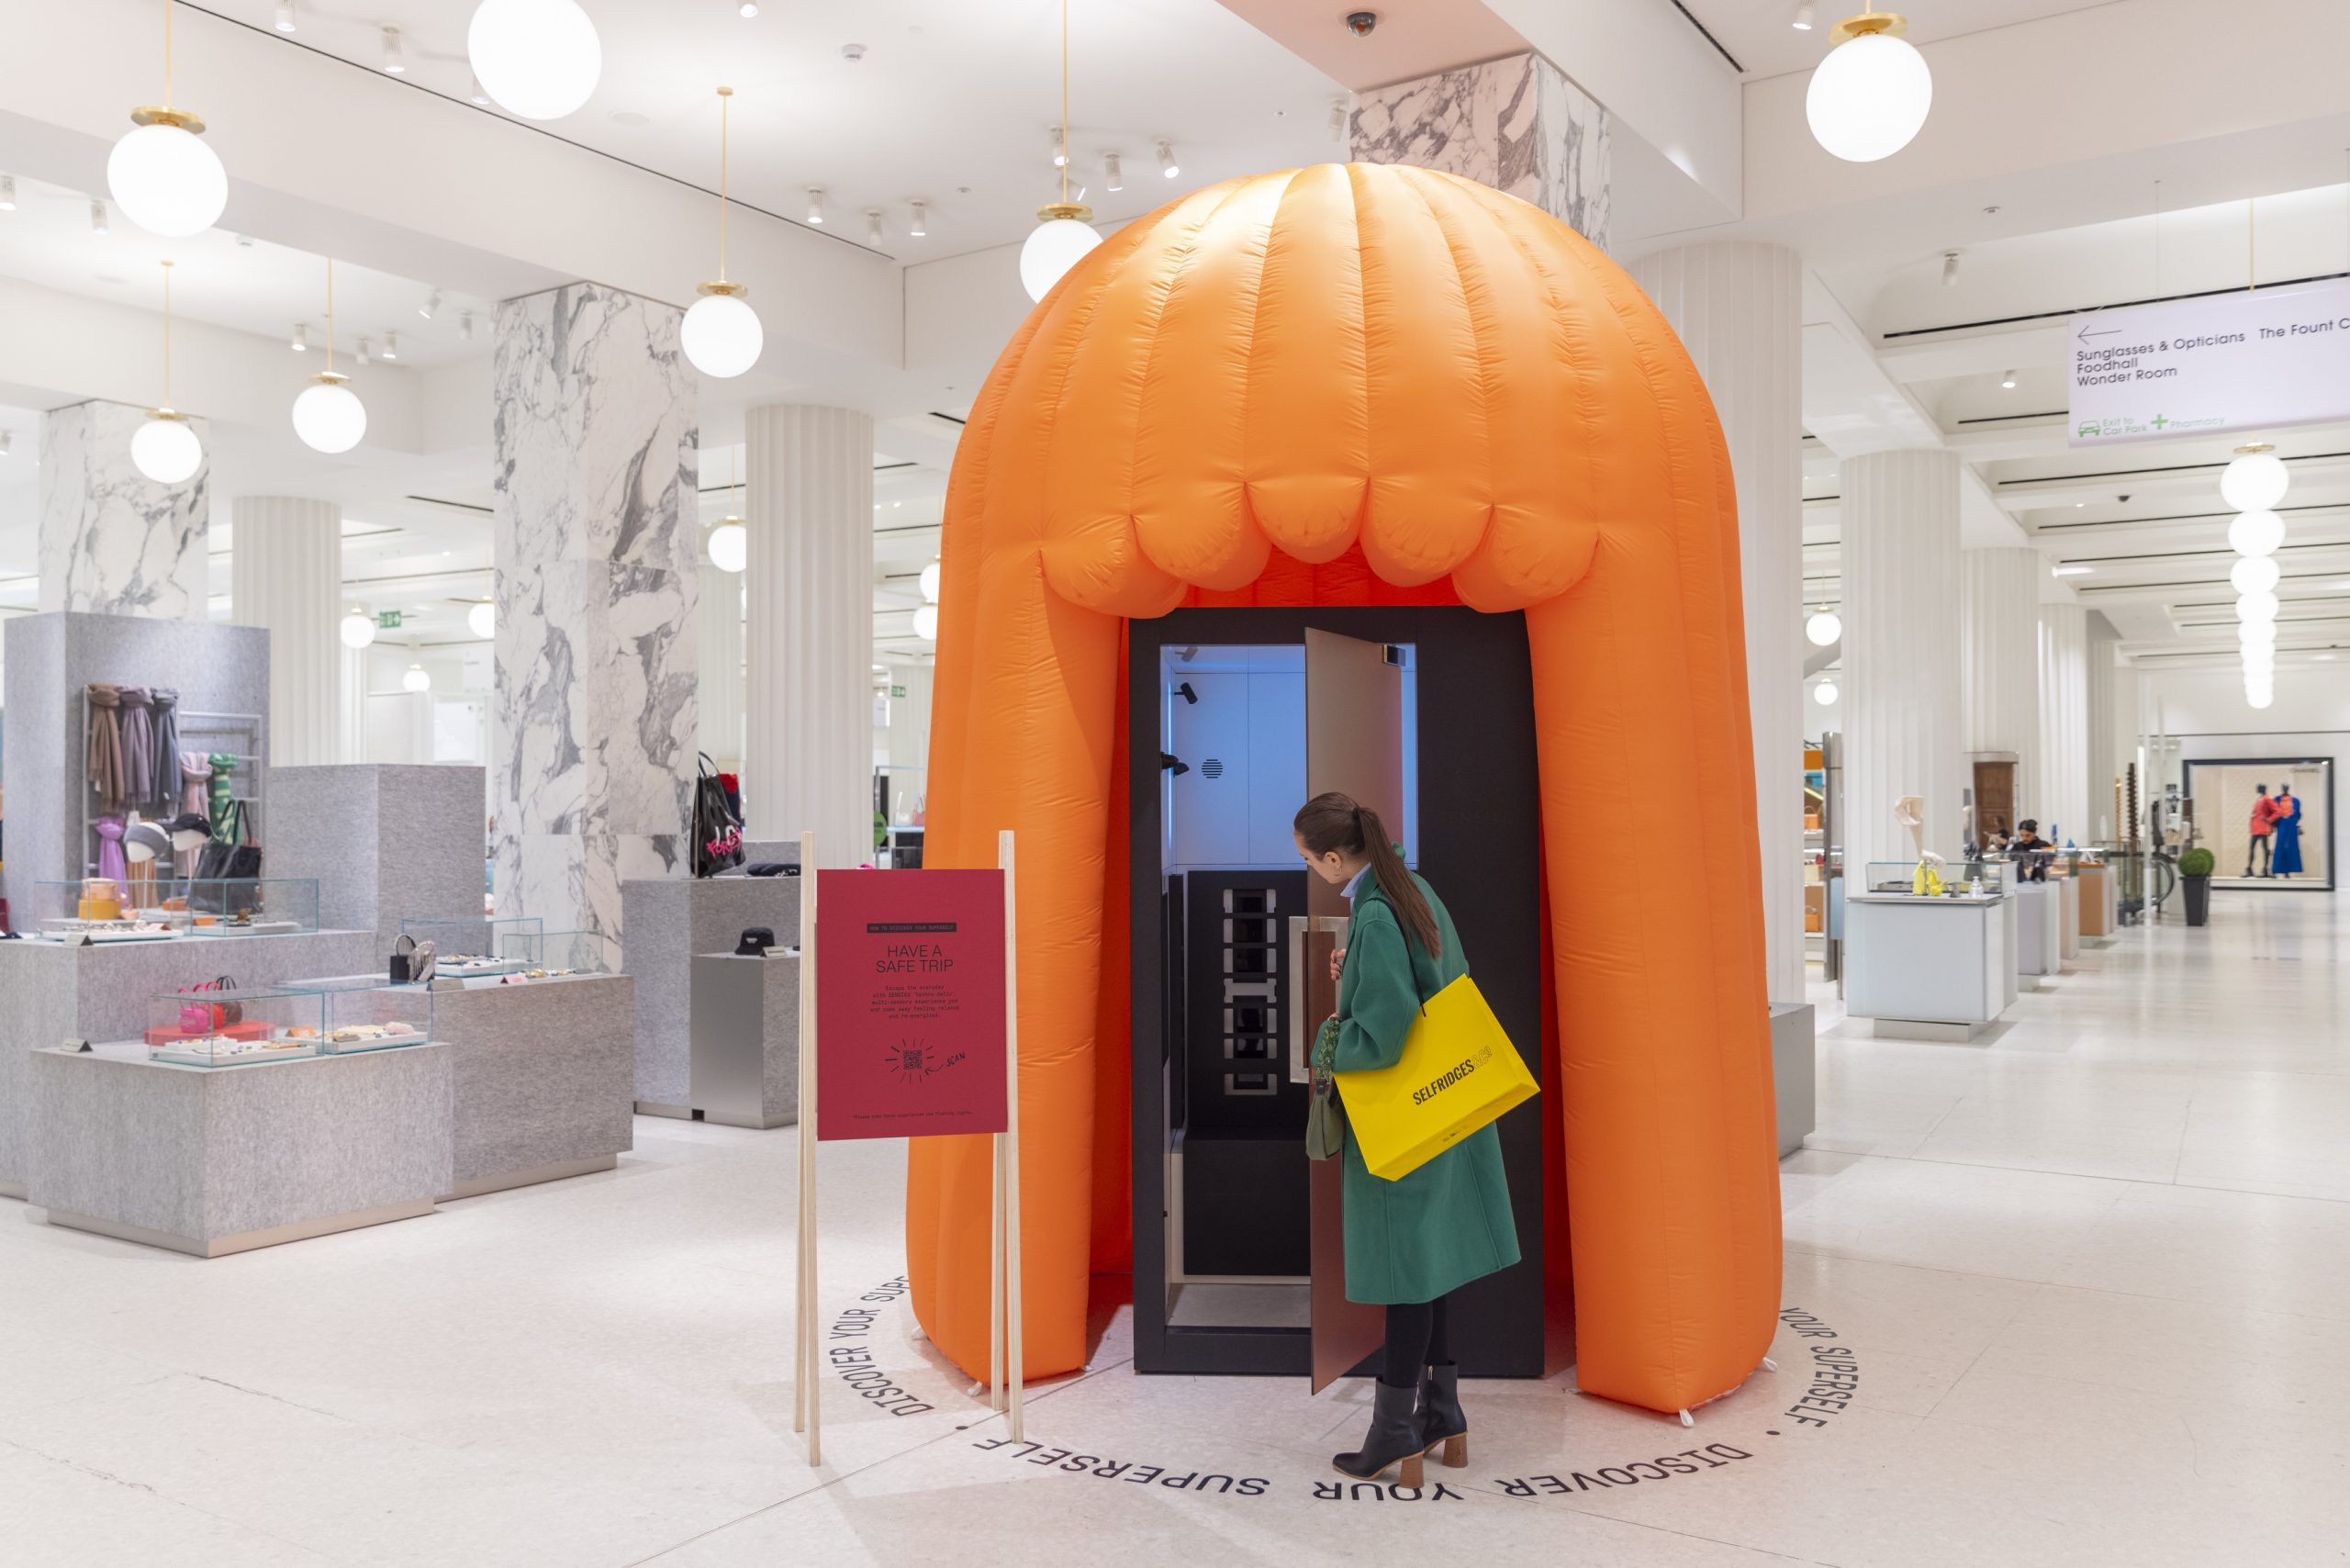 https://worldxo.org/wp-content/uploads/2022/03/a-customer-tries-the-sensory-reality-pod-by-sensiks-in-selfridges-london-part-of-superself-launching-today-feb-3rd-the-pod-offers-a-safe-psychedelic-trip-2-scaled.jpg